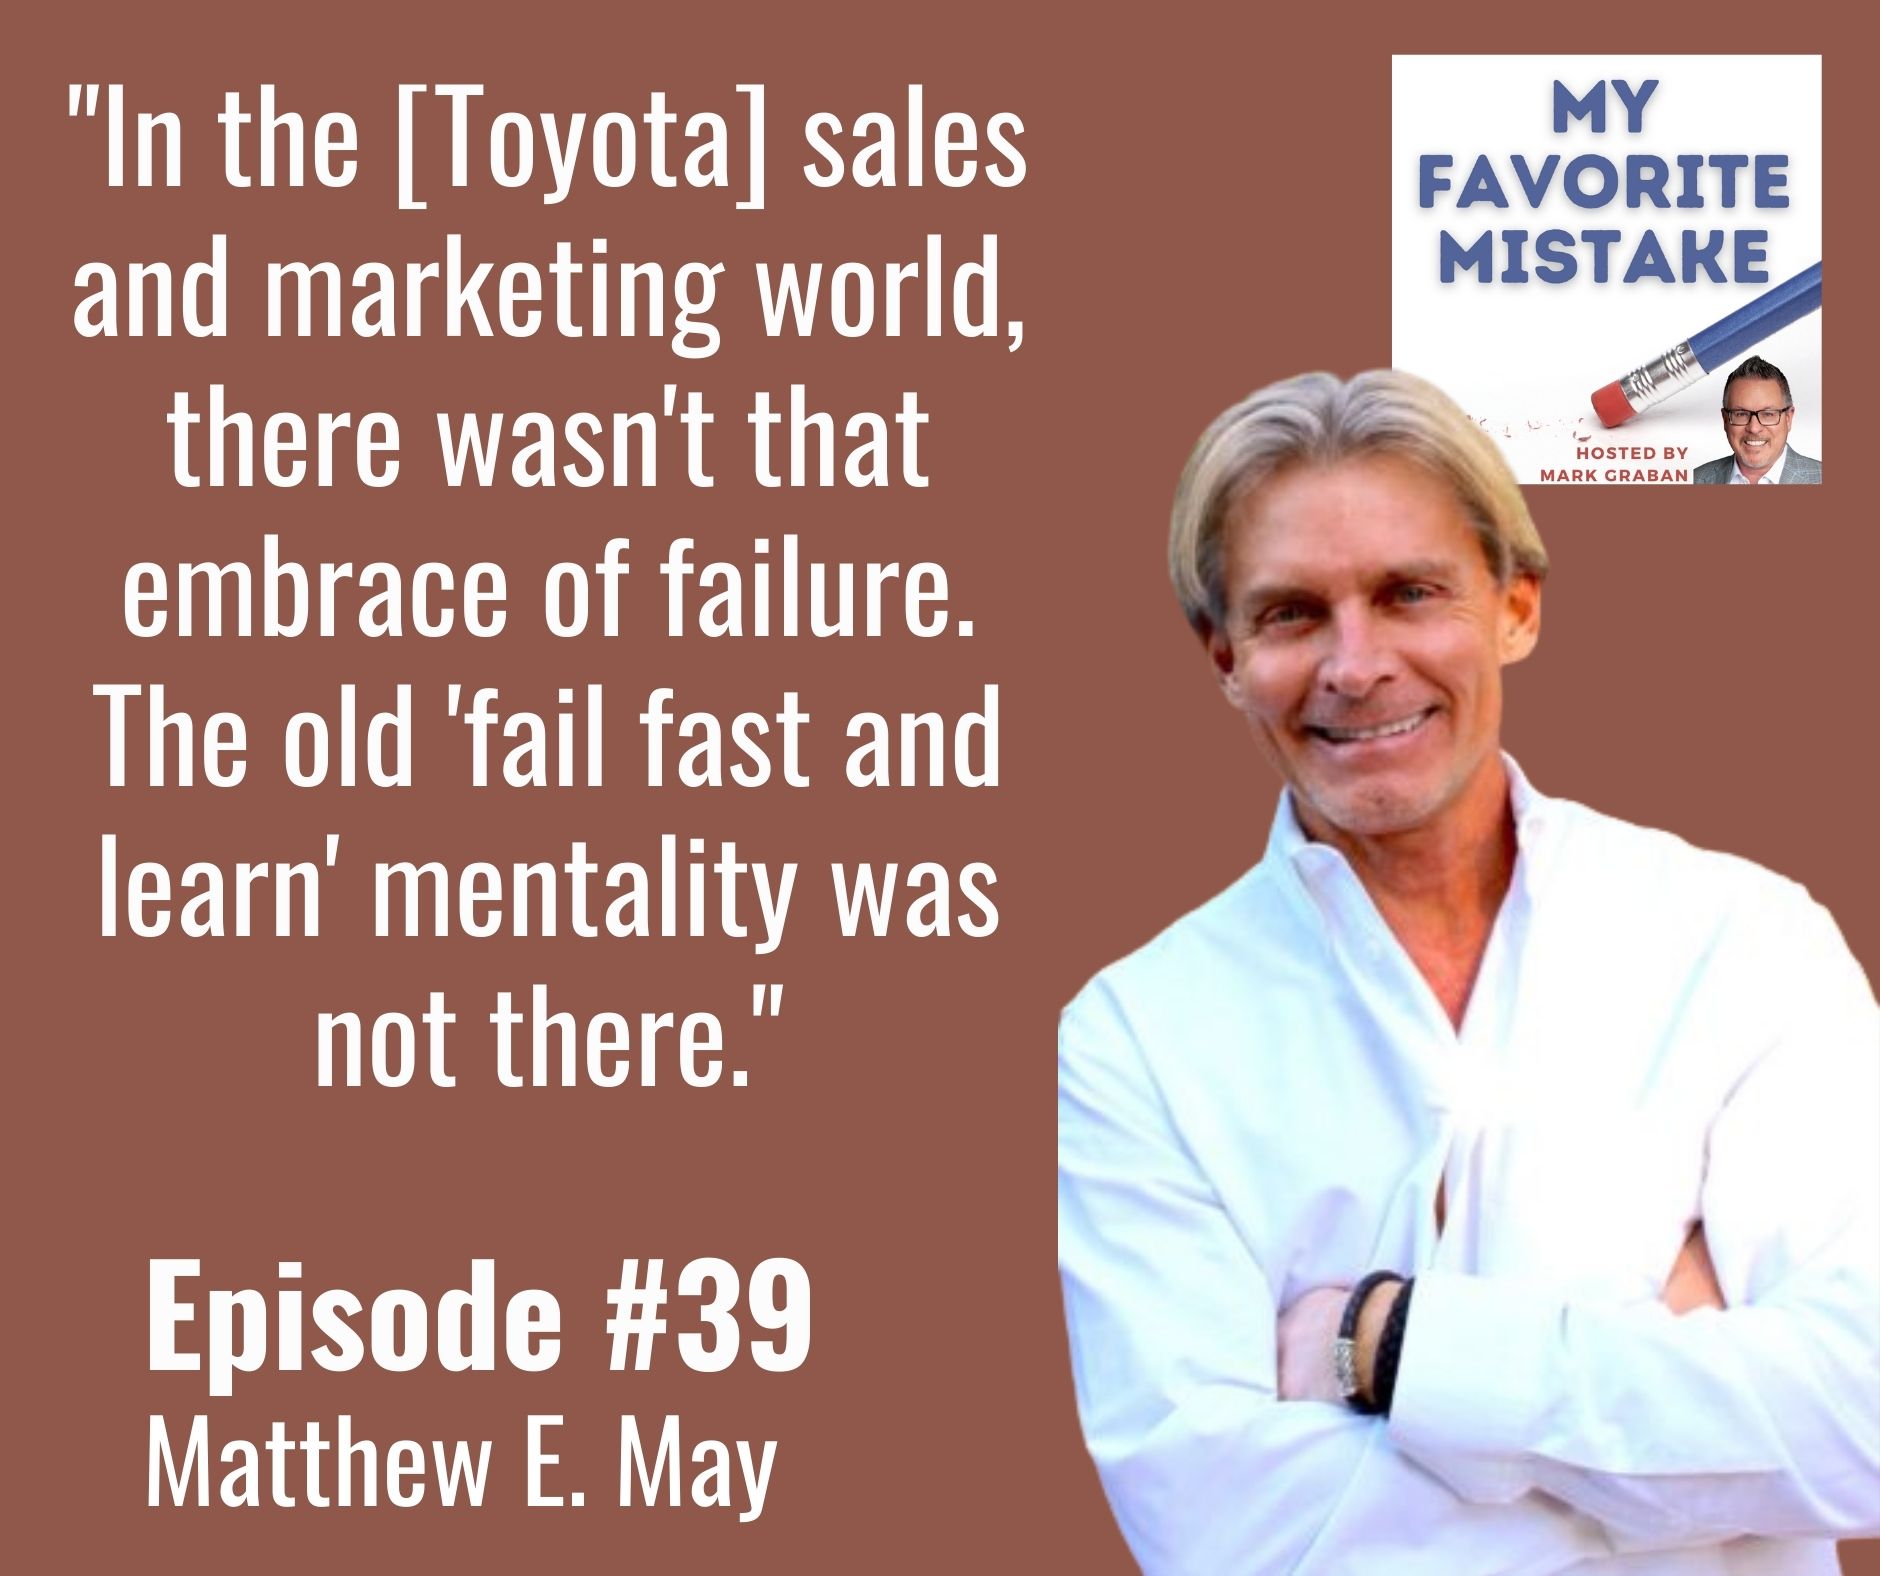 "In the [Toyota] sales and marketing world, there wasn't that embrace of failure. The old 'fail fast and learn' mentality was not there."